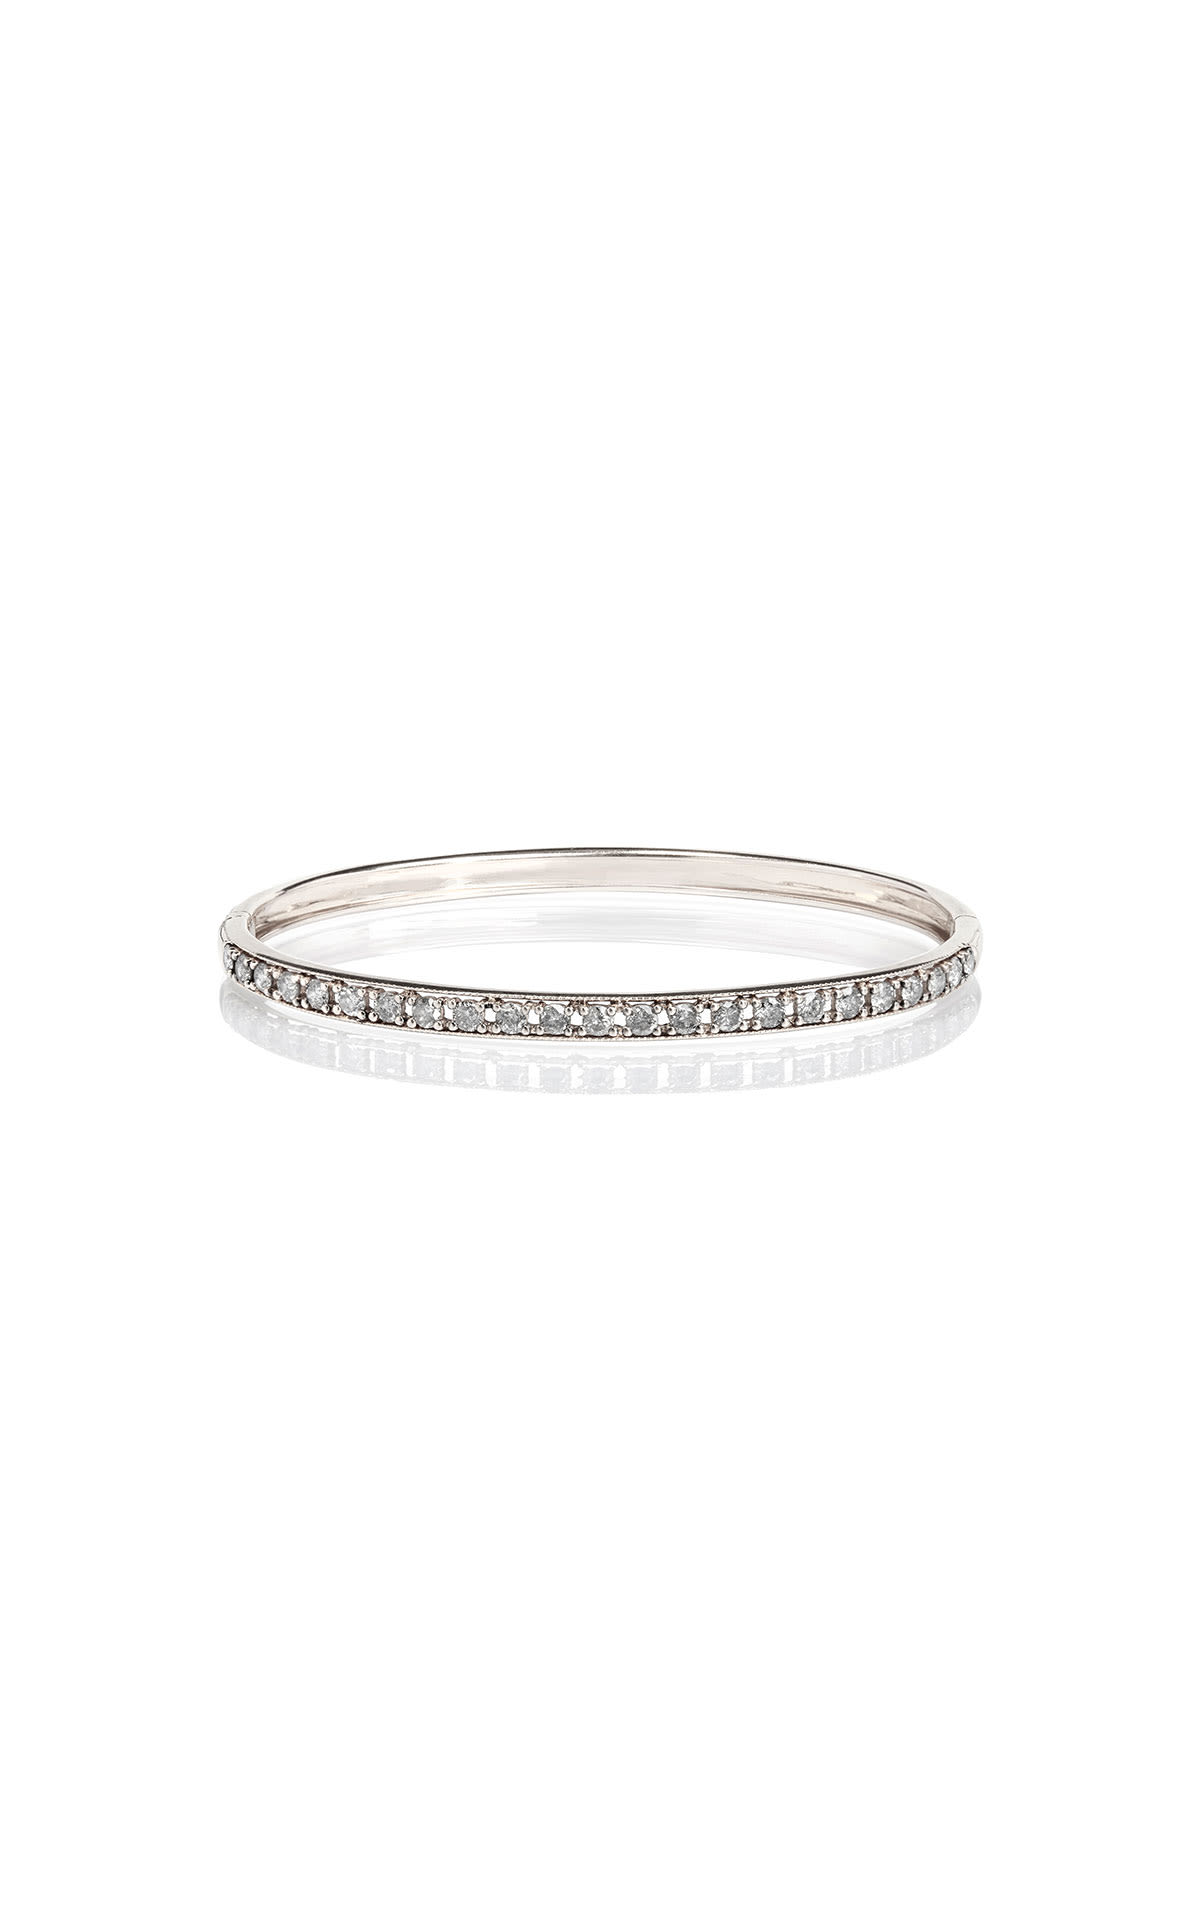 Annoushka Dusty diamon line bangle 18ct white gold from Bicester Village